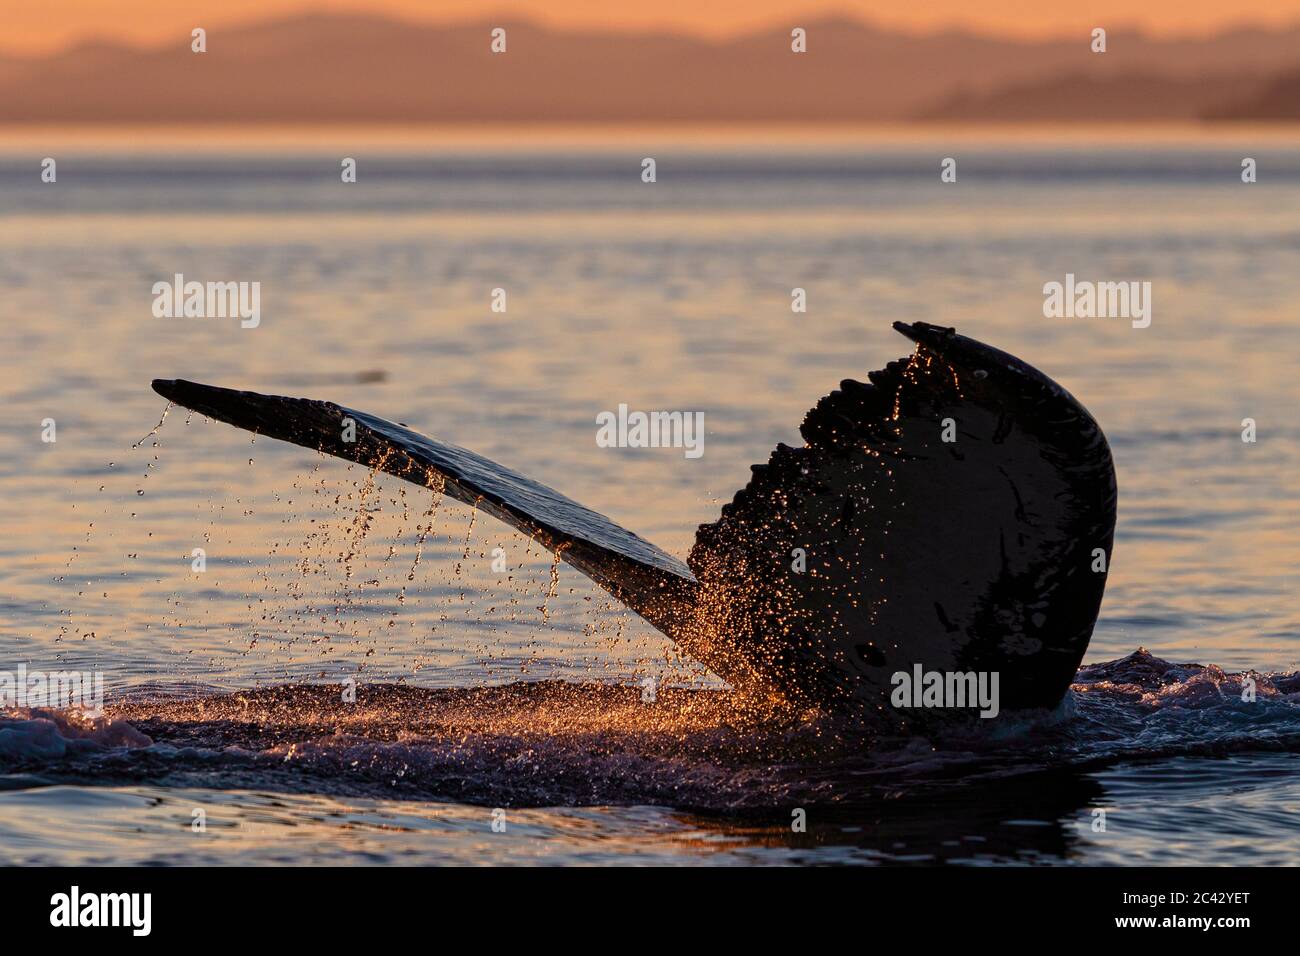 Water is dripping off a humpback whale's fluke during sunset in the Broughton Archipelago, First Nations Territory, British Columbia, Canada Stock Photo